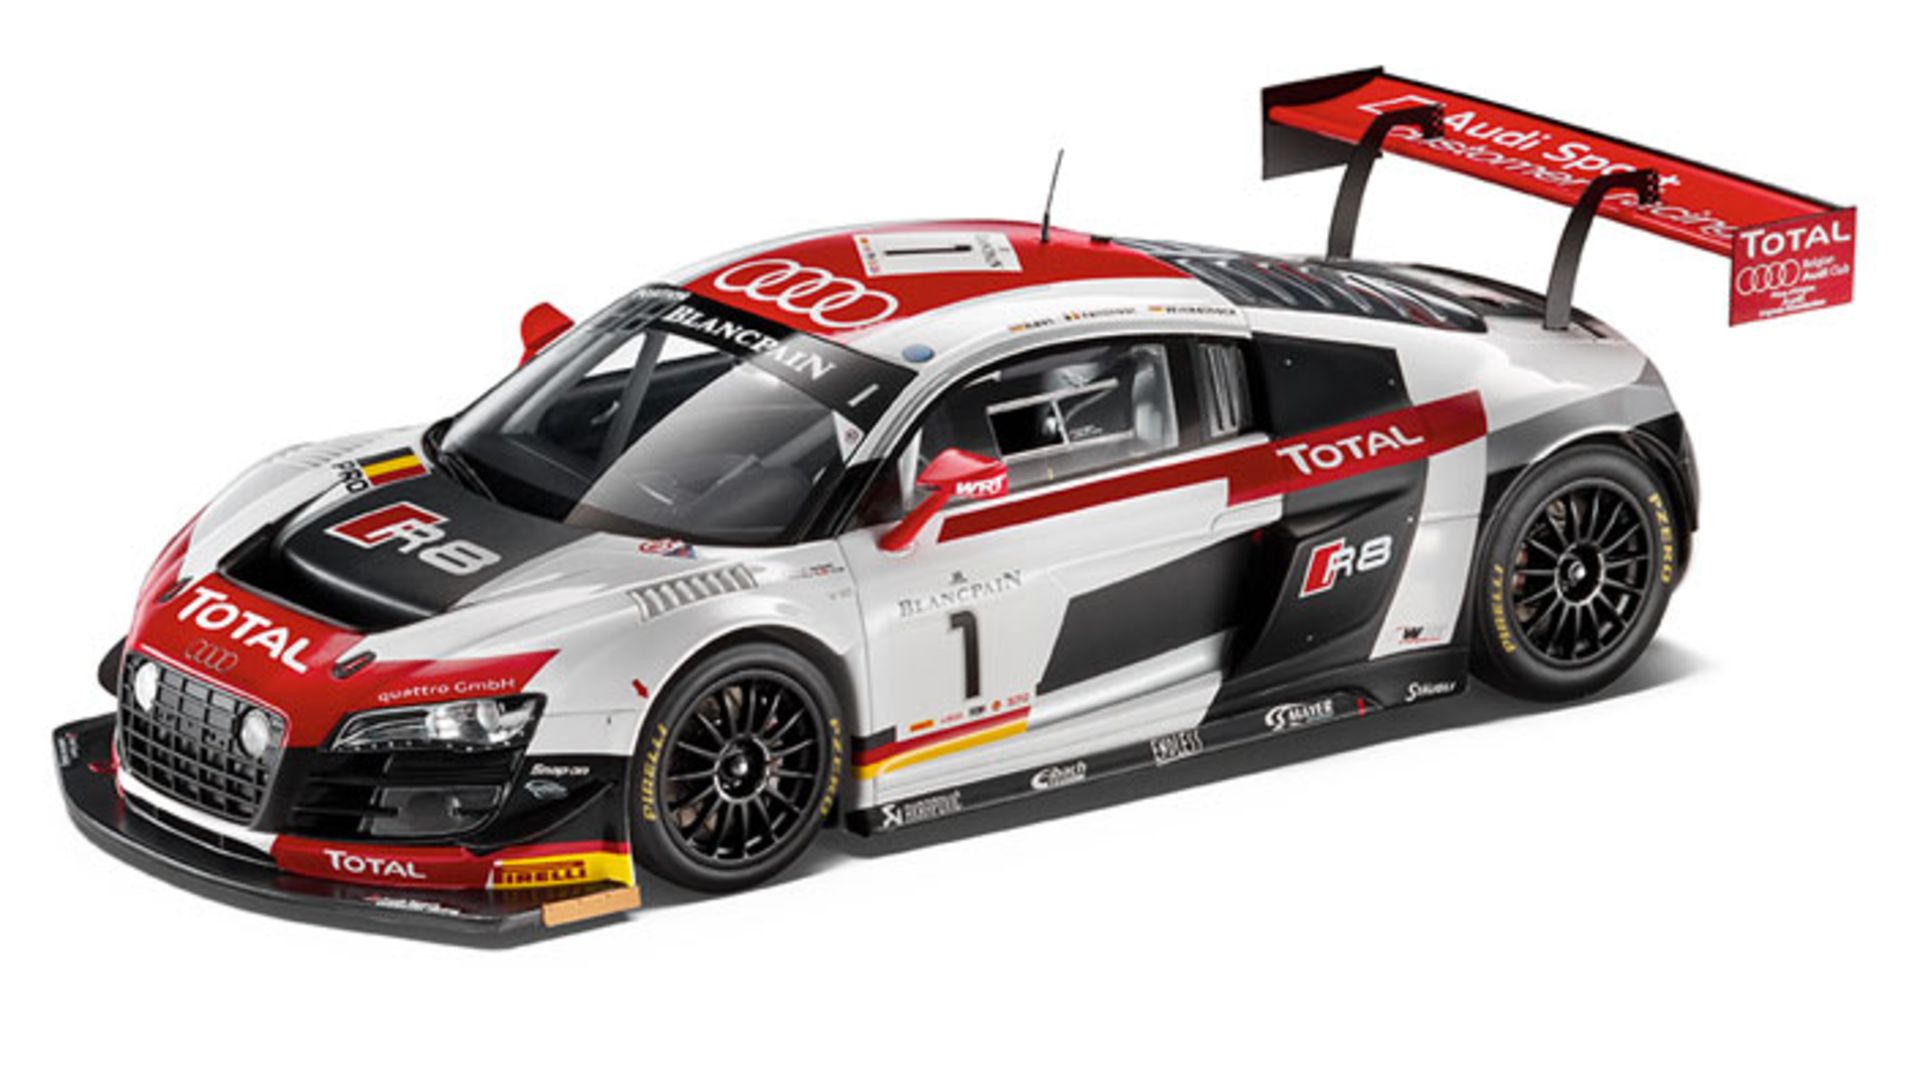 V *TRADE QTY* Brand New Officially Licenced 1/18 Scale Audi R8 LMS Full Fuction R/C Car (Colours May